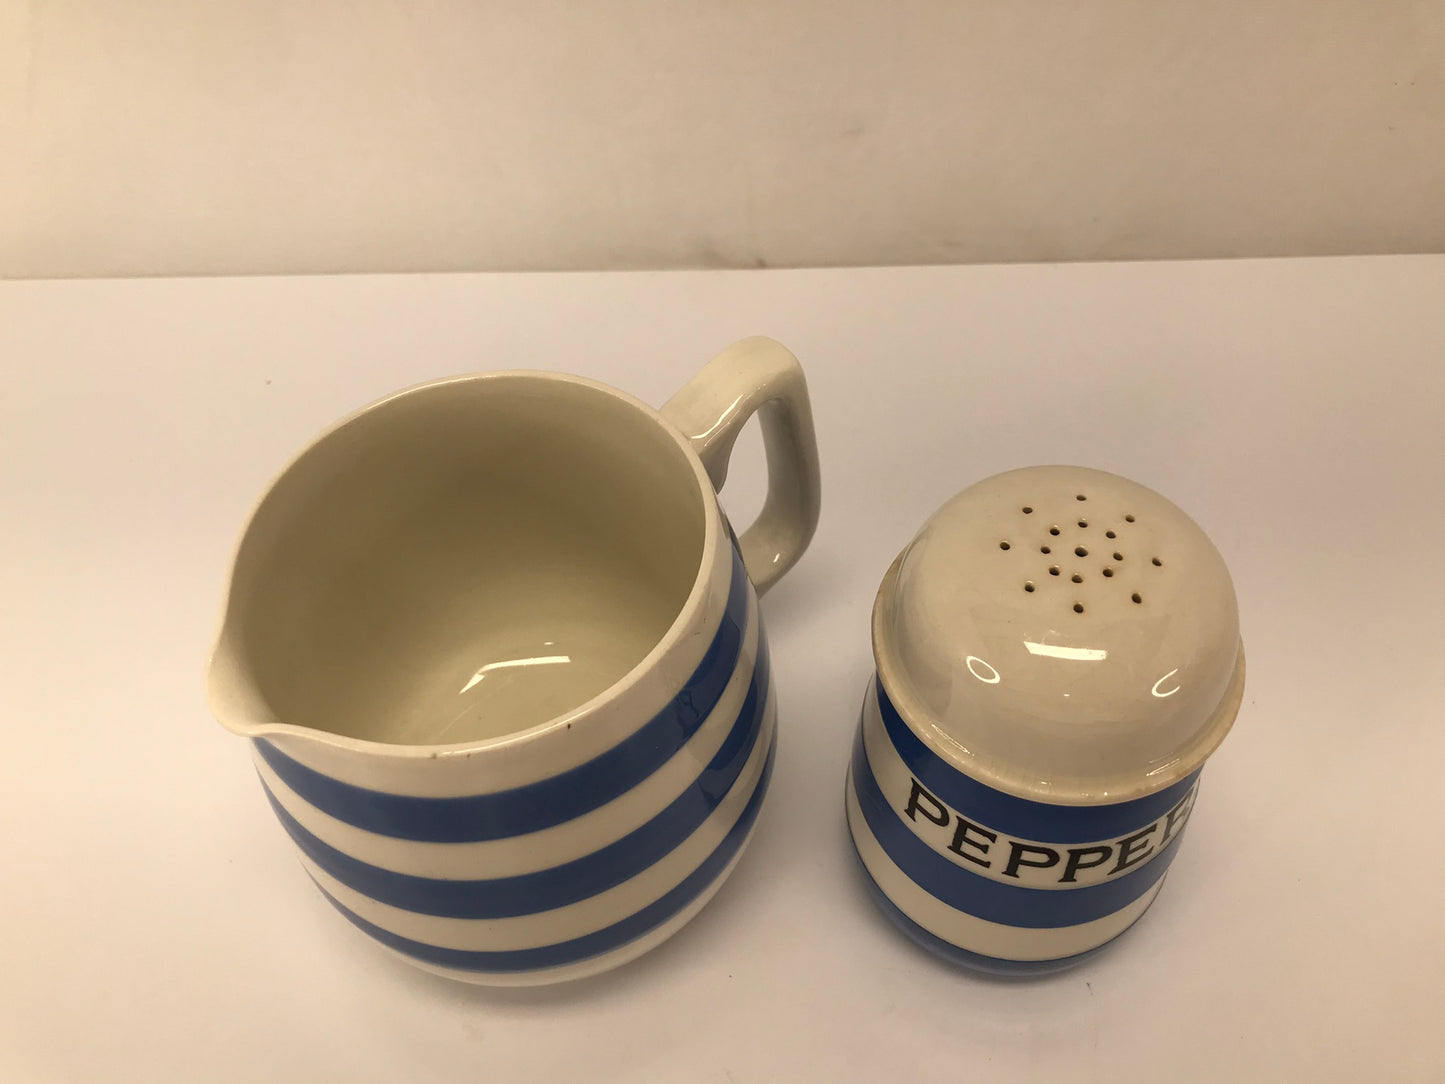 Antique Cornishware RARE Large Round Pottery Pepper Shaker With Similar Style Vintage Stipped Pottery Creamer Jug Sold Together